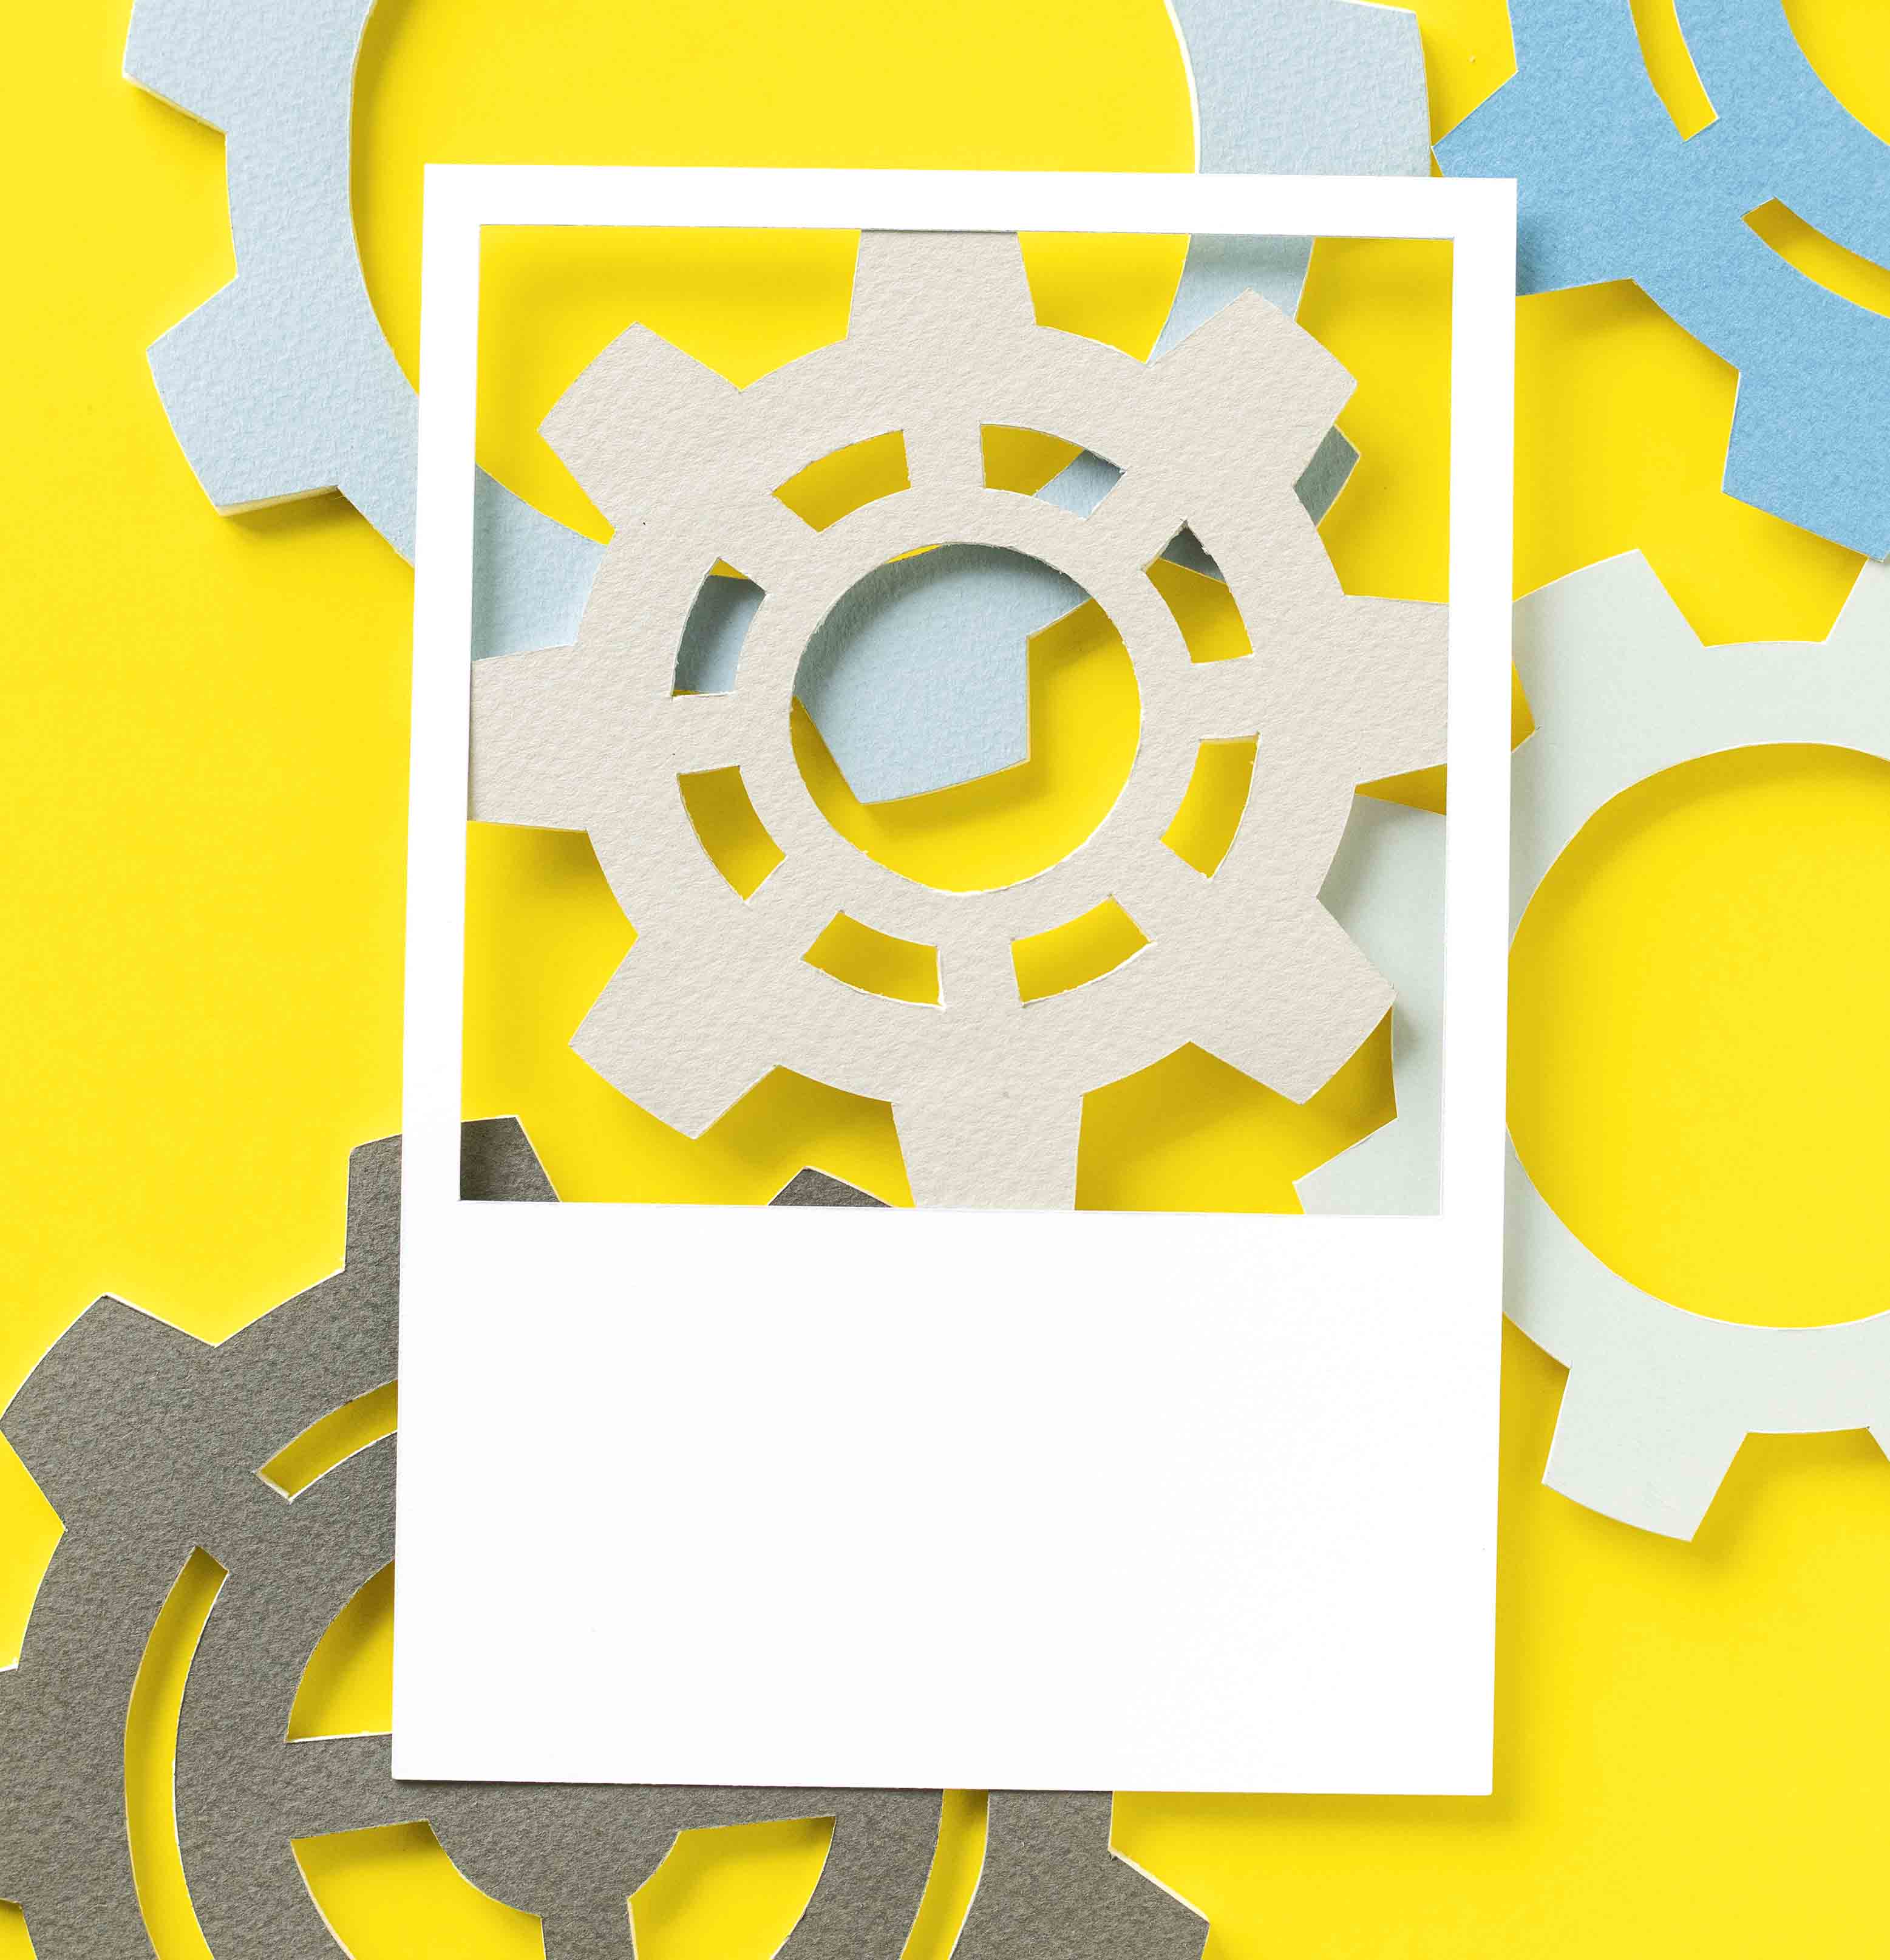 gears on a yellow background